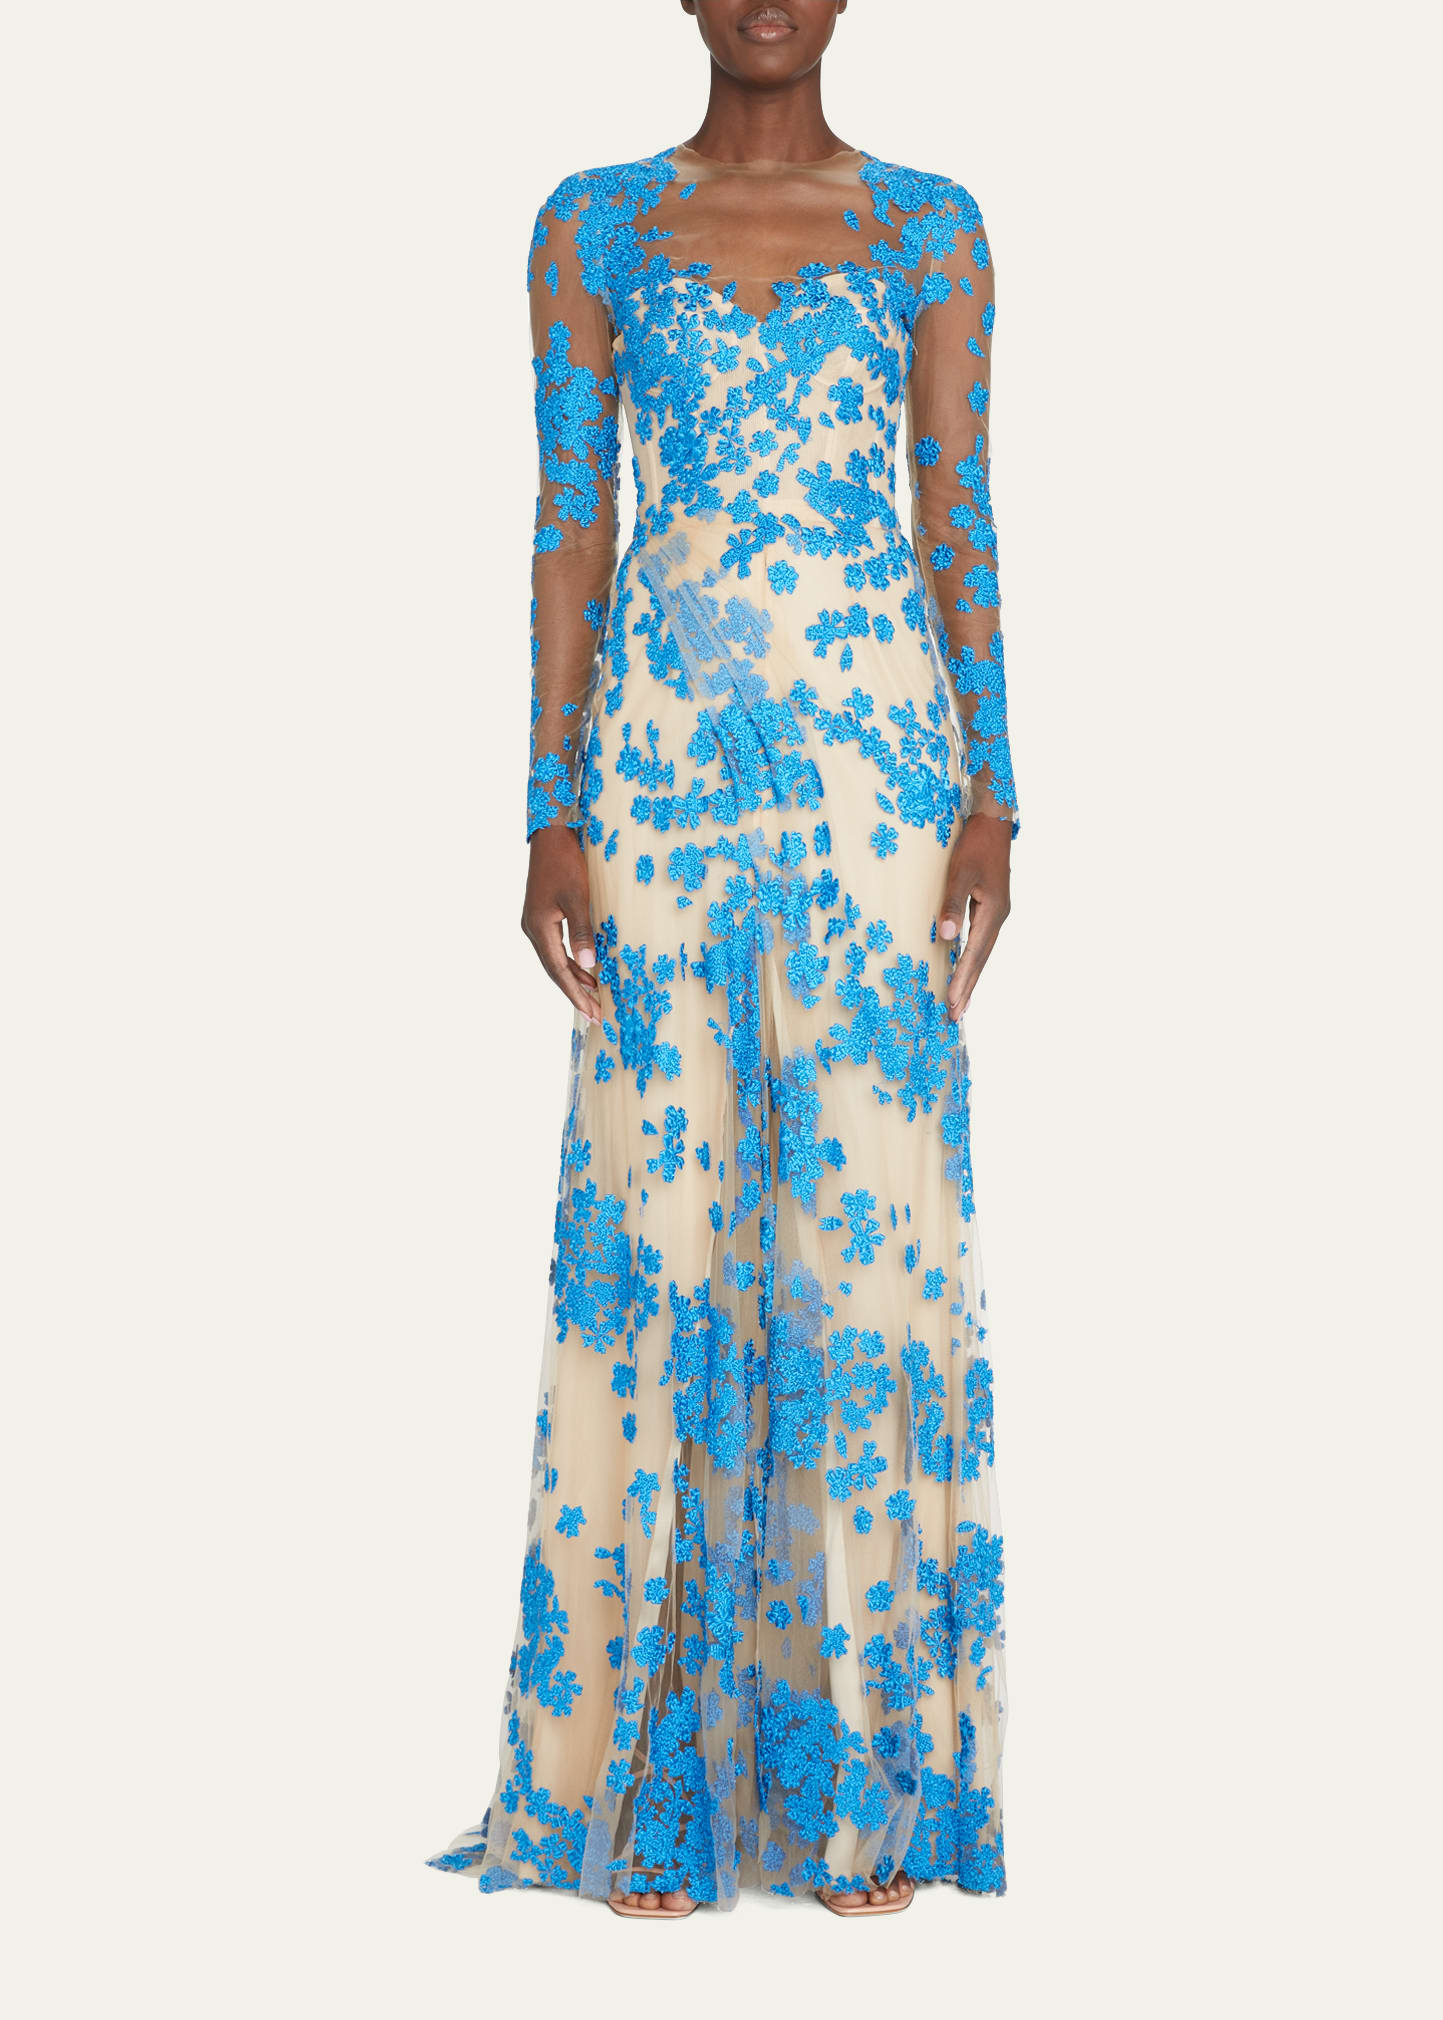 MONIQUE LHUILLIER TULLE FLORAL-EMBROIDERED ILLUSION GOWN